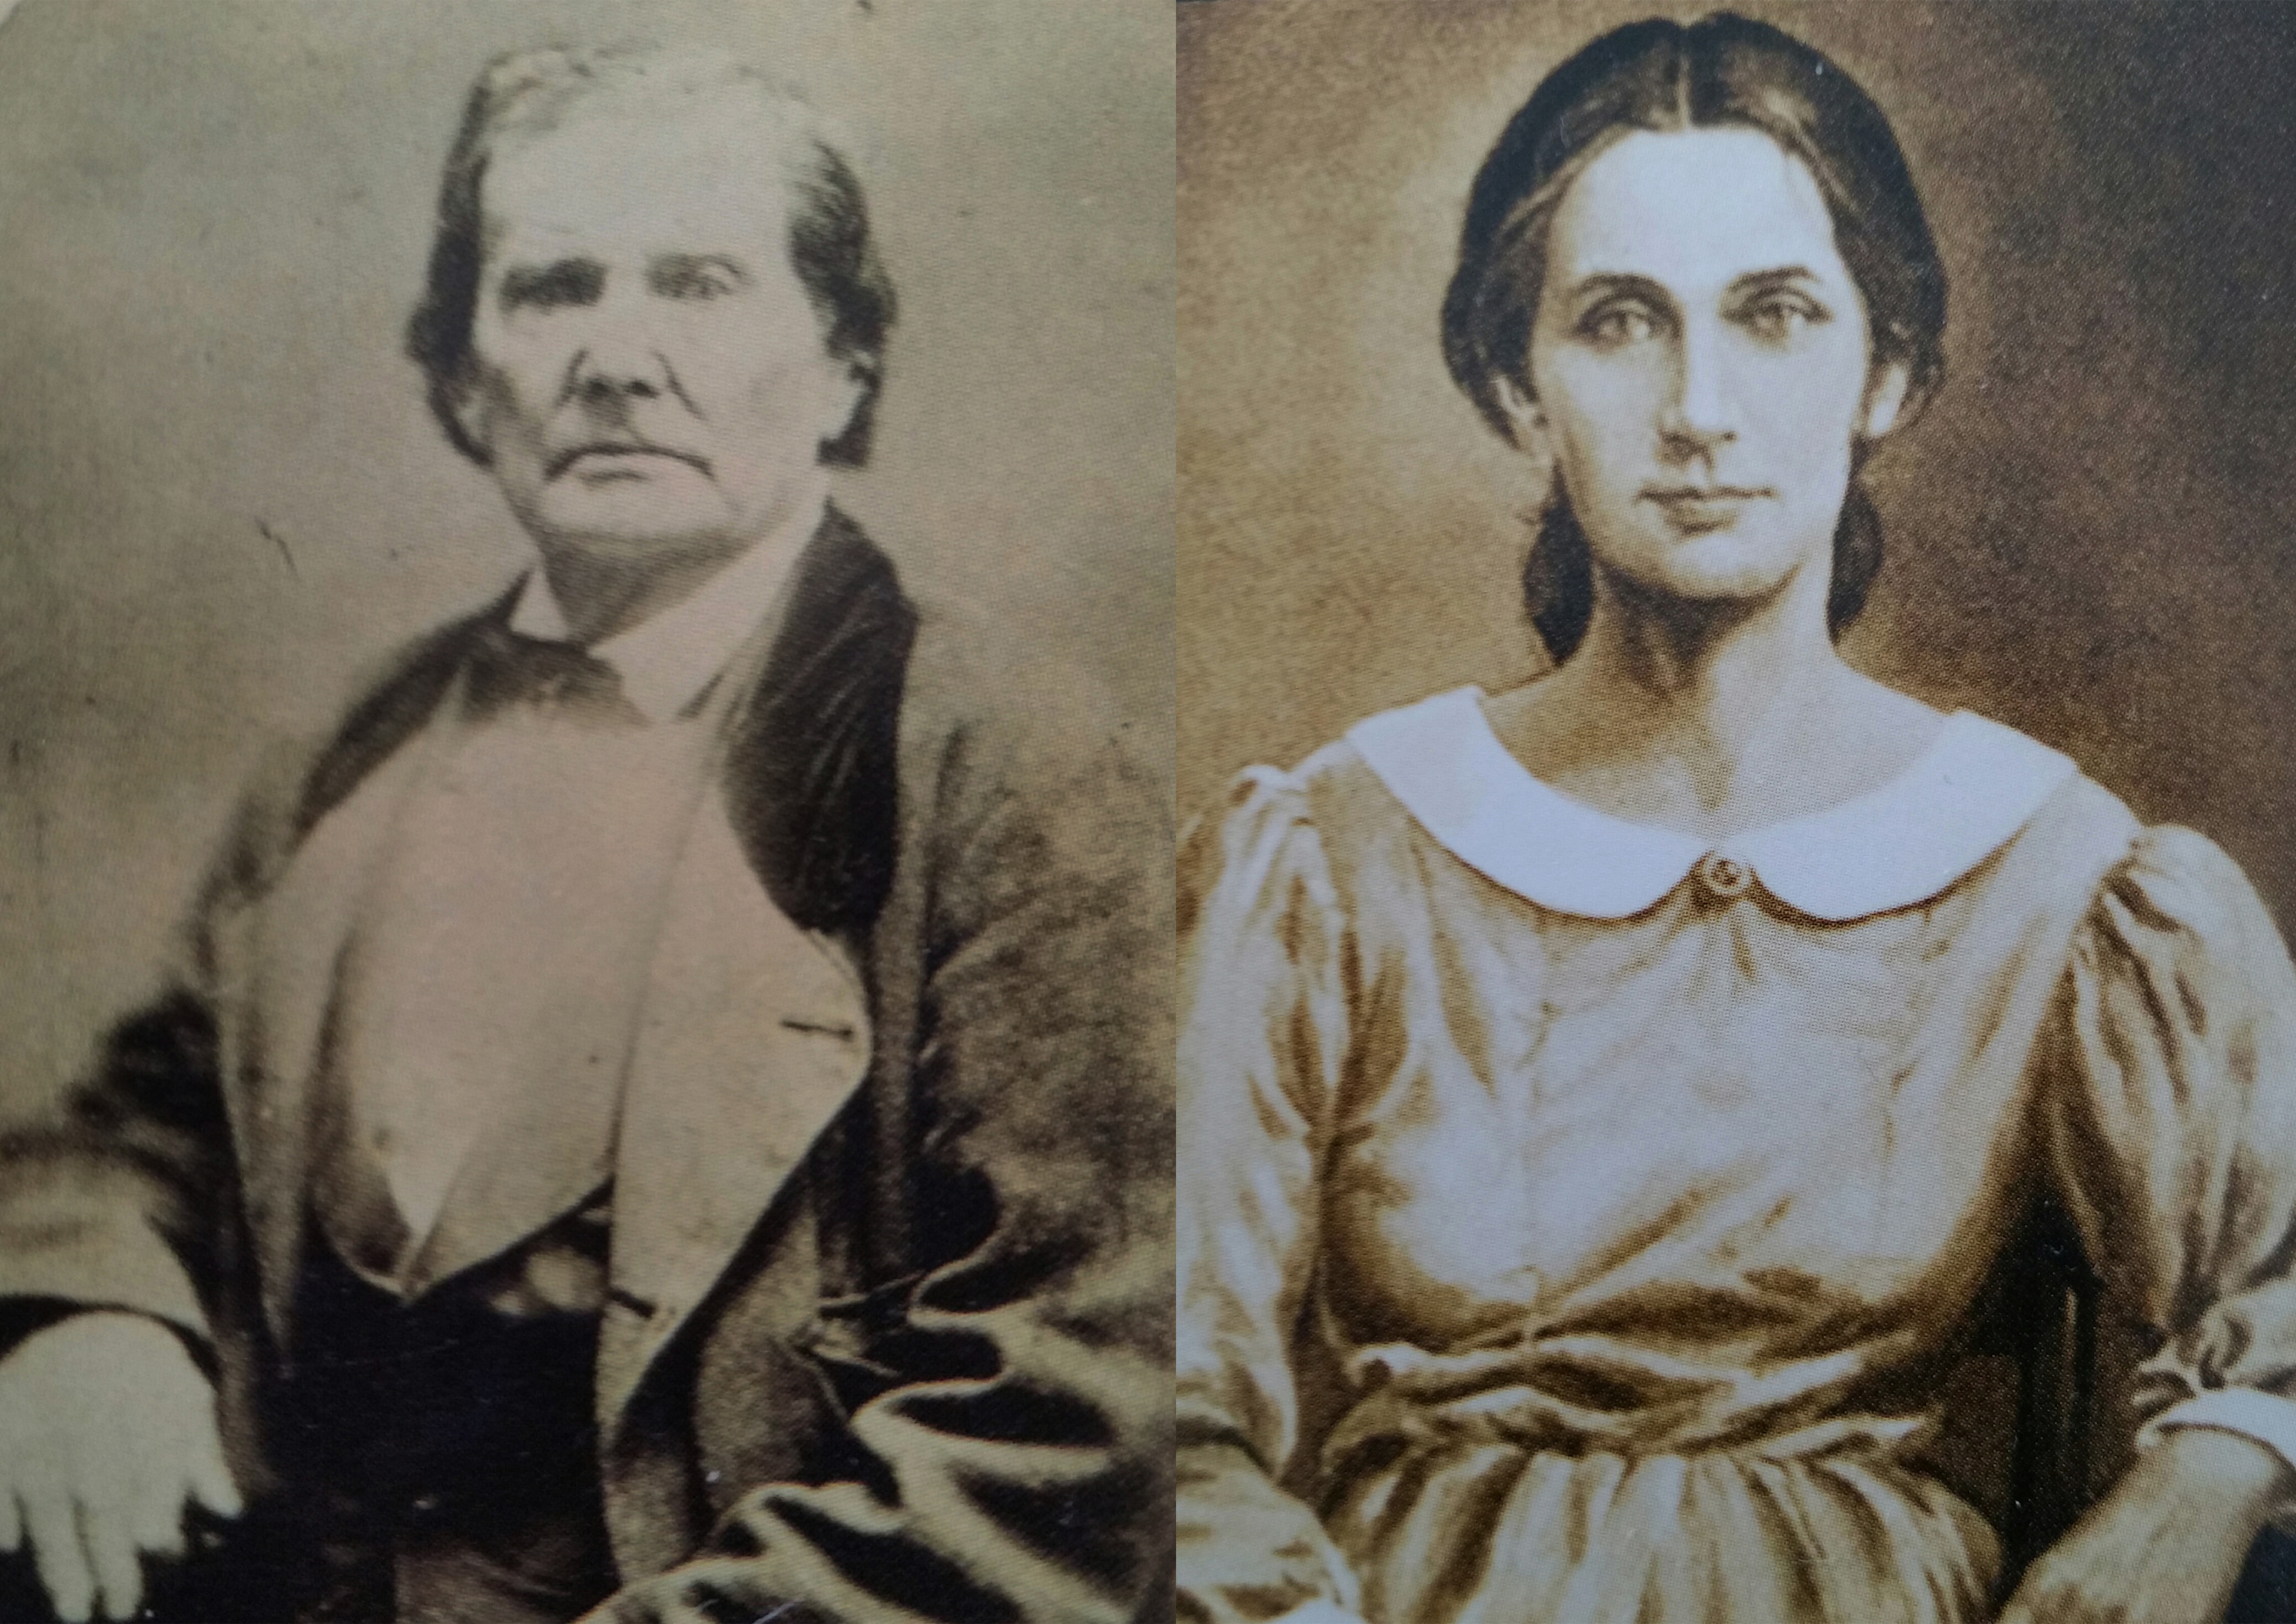 Meet the parents of Abraham Lincoln